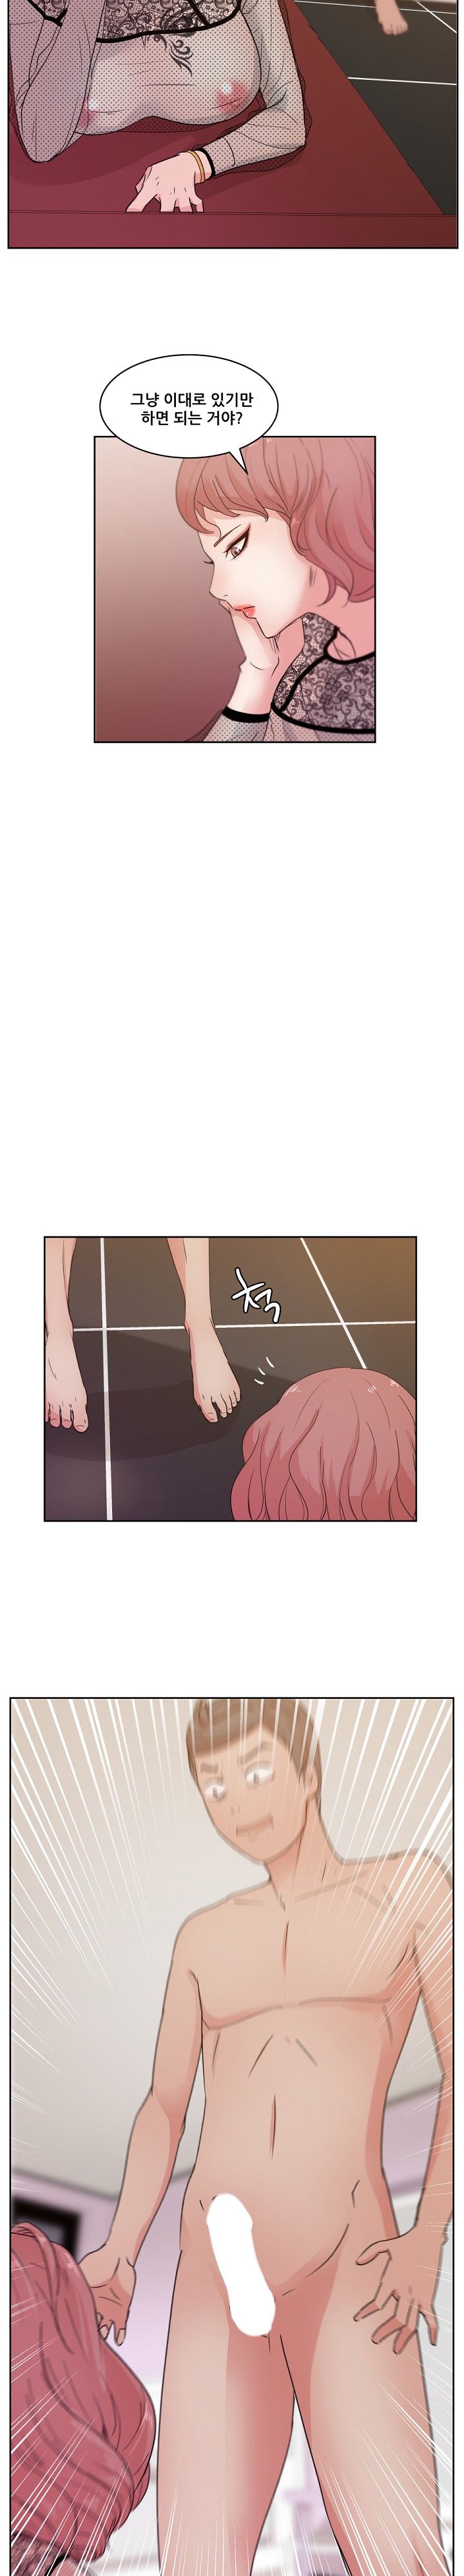 Sooyung Comic Shop Raw - Chapter 8 Page 8